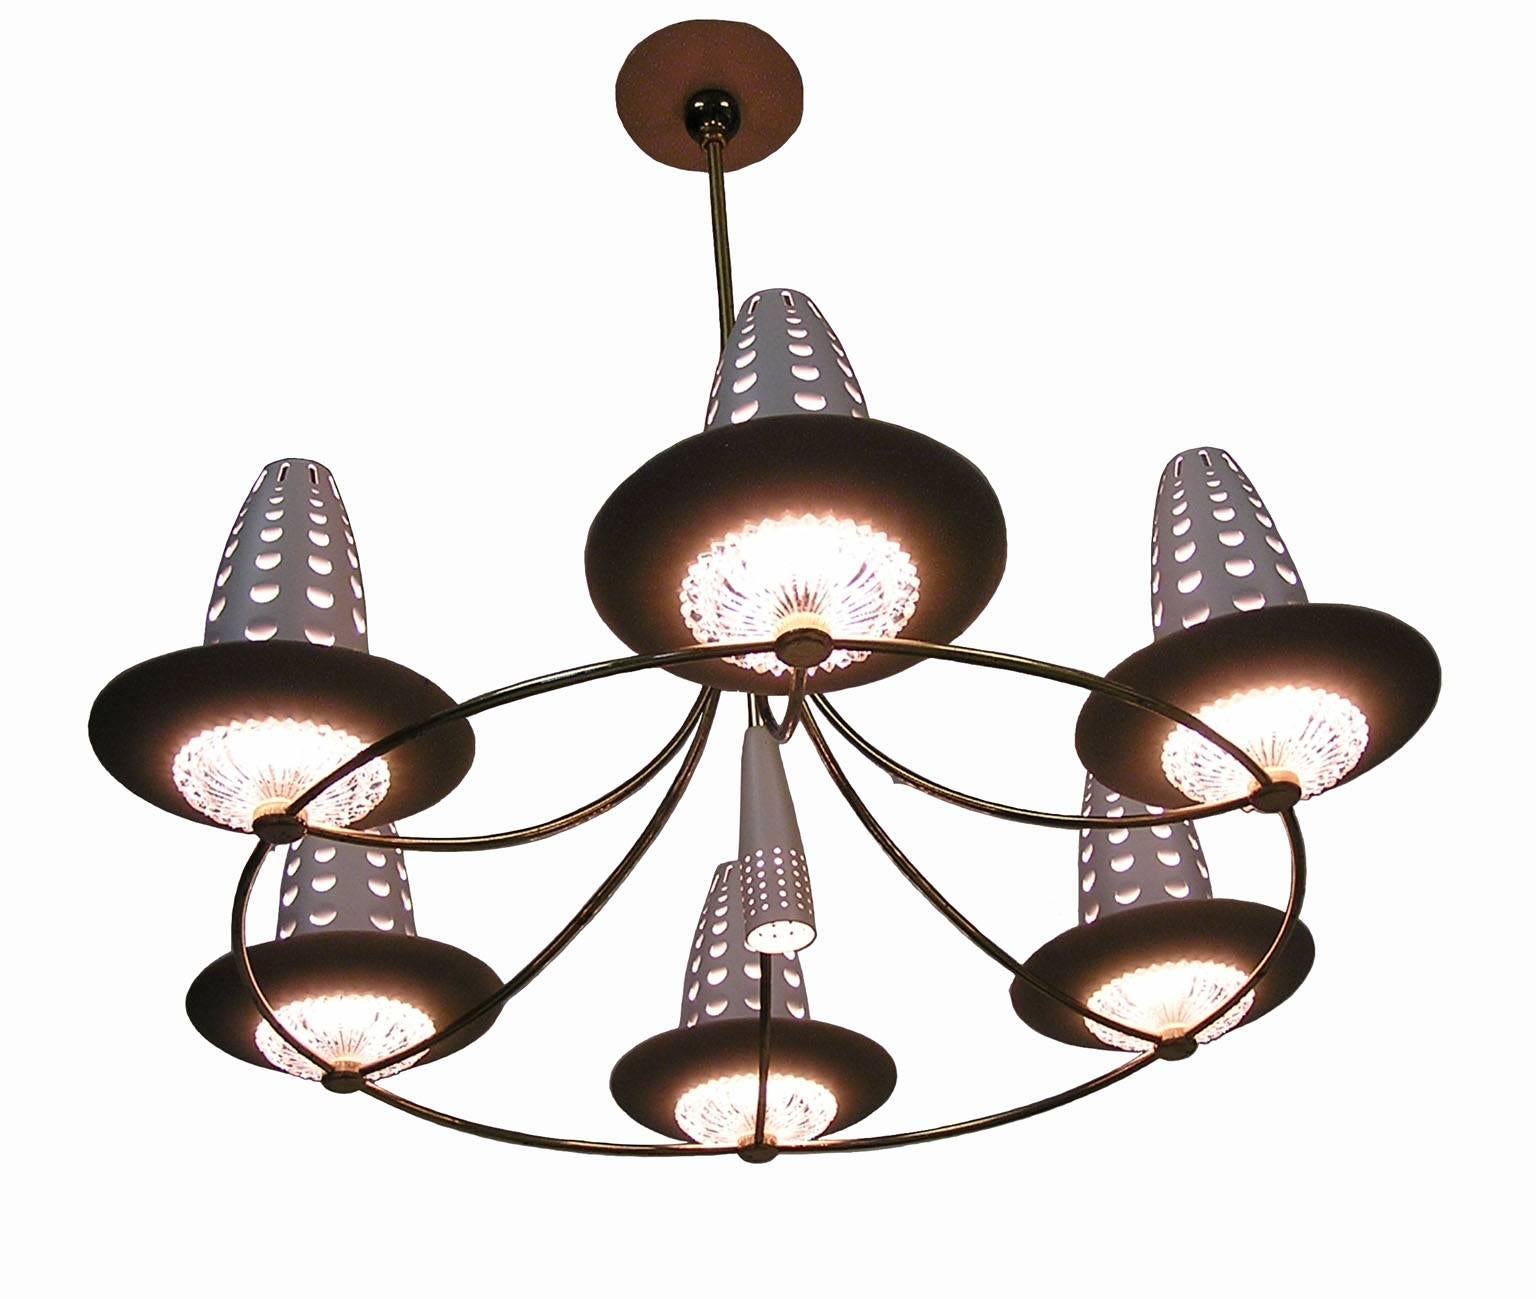 A stunning six-branch brass and glass chandelier by one of the notable lighting designer's of the Mid-Century Modern era. Designed by Gerald Thurston for Lightolier in the 1950s and featuring six branched sockets with beautifully crafted lower